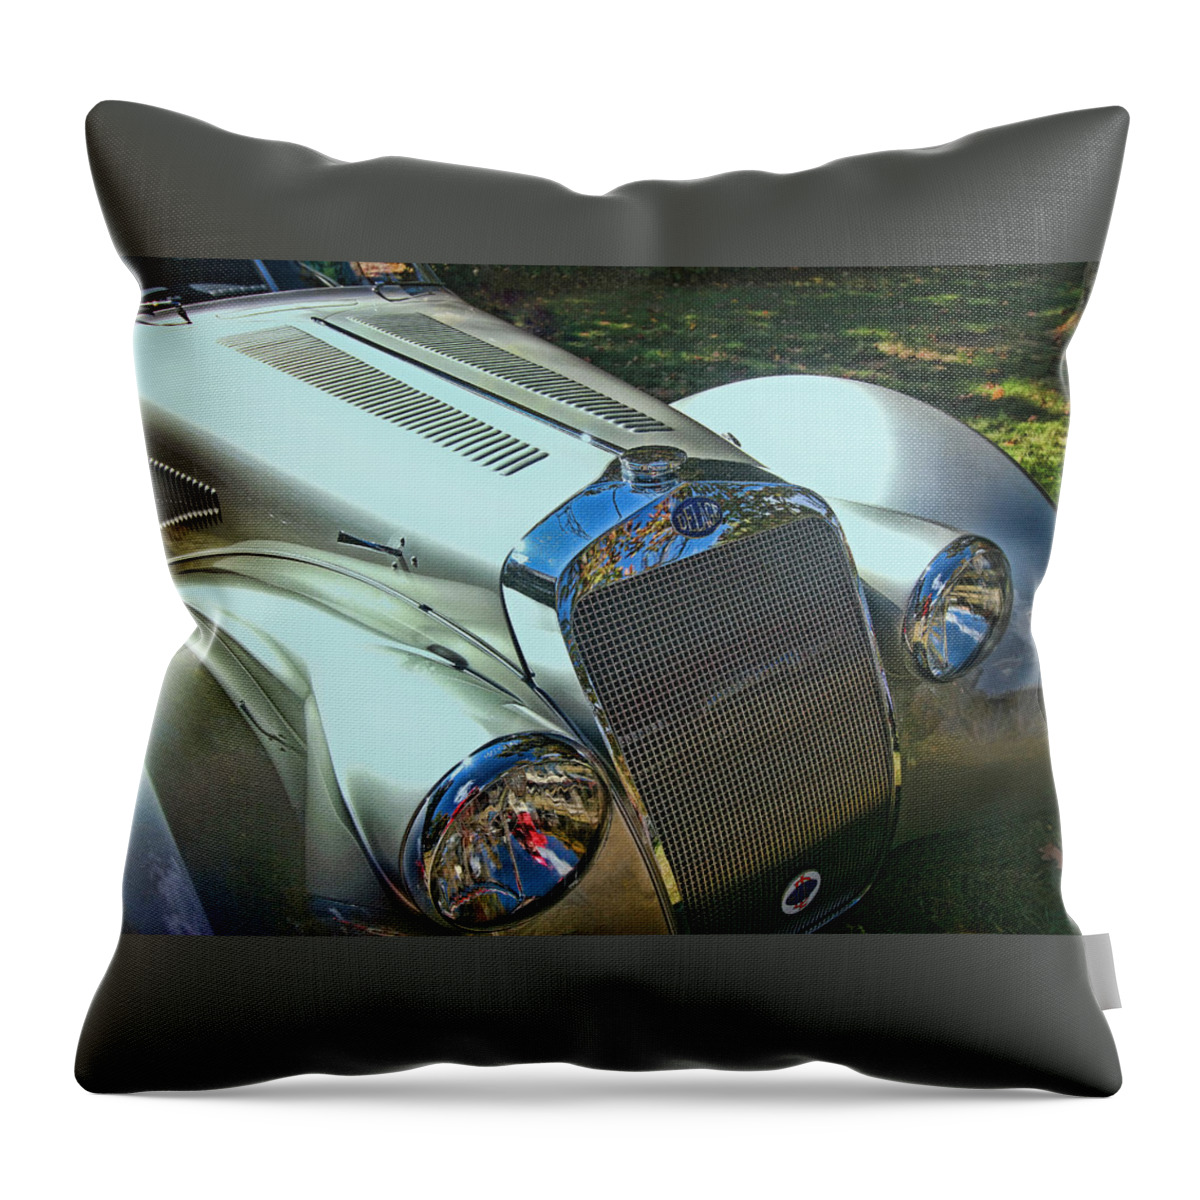 1938 Delage Aerodynamic Coupe Throw Pillow featuring the photograph 1938 Delage D8 - 120 Aerodynamic Coupe Front Grill by Allen Beatty